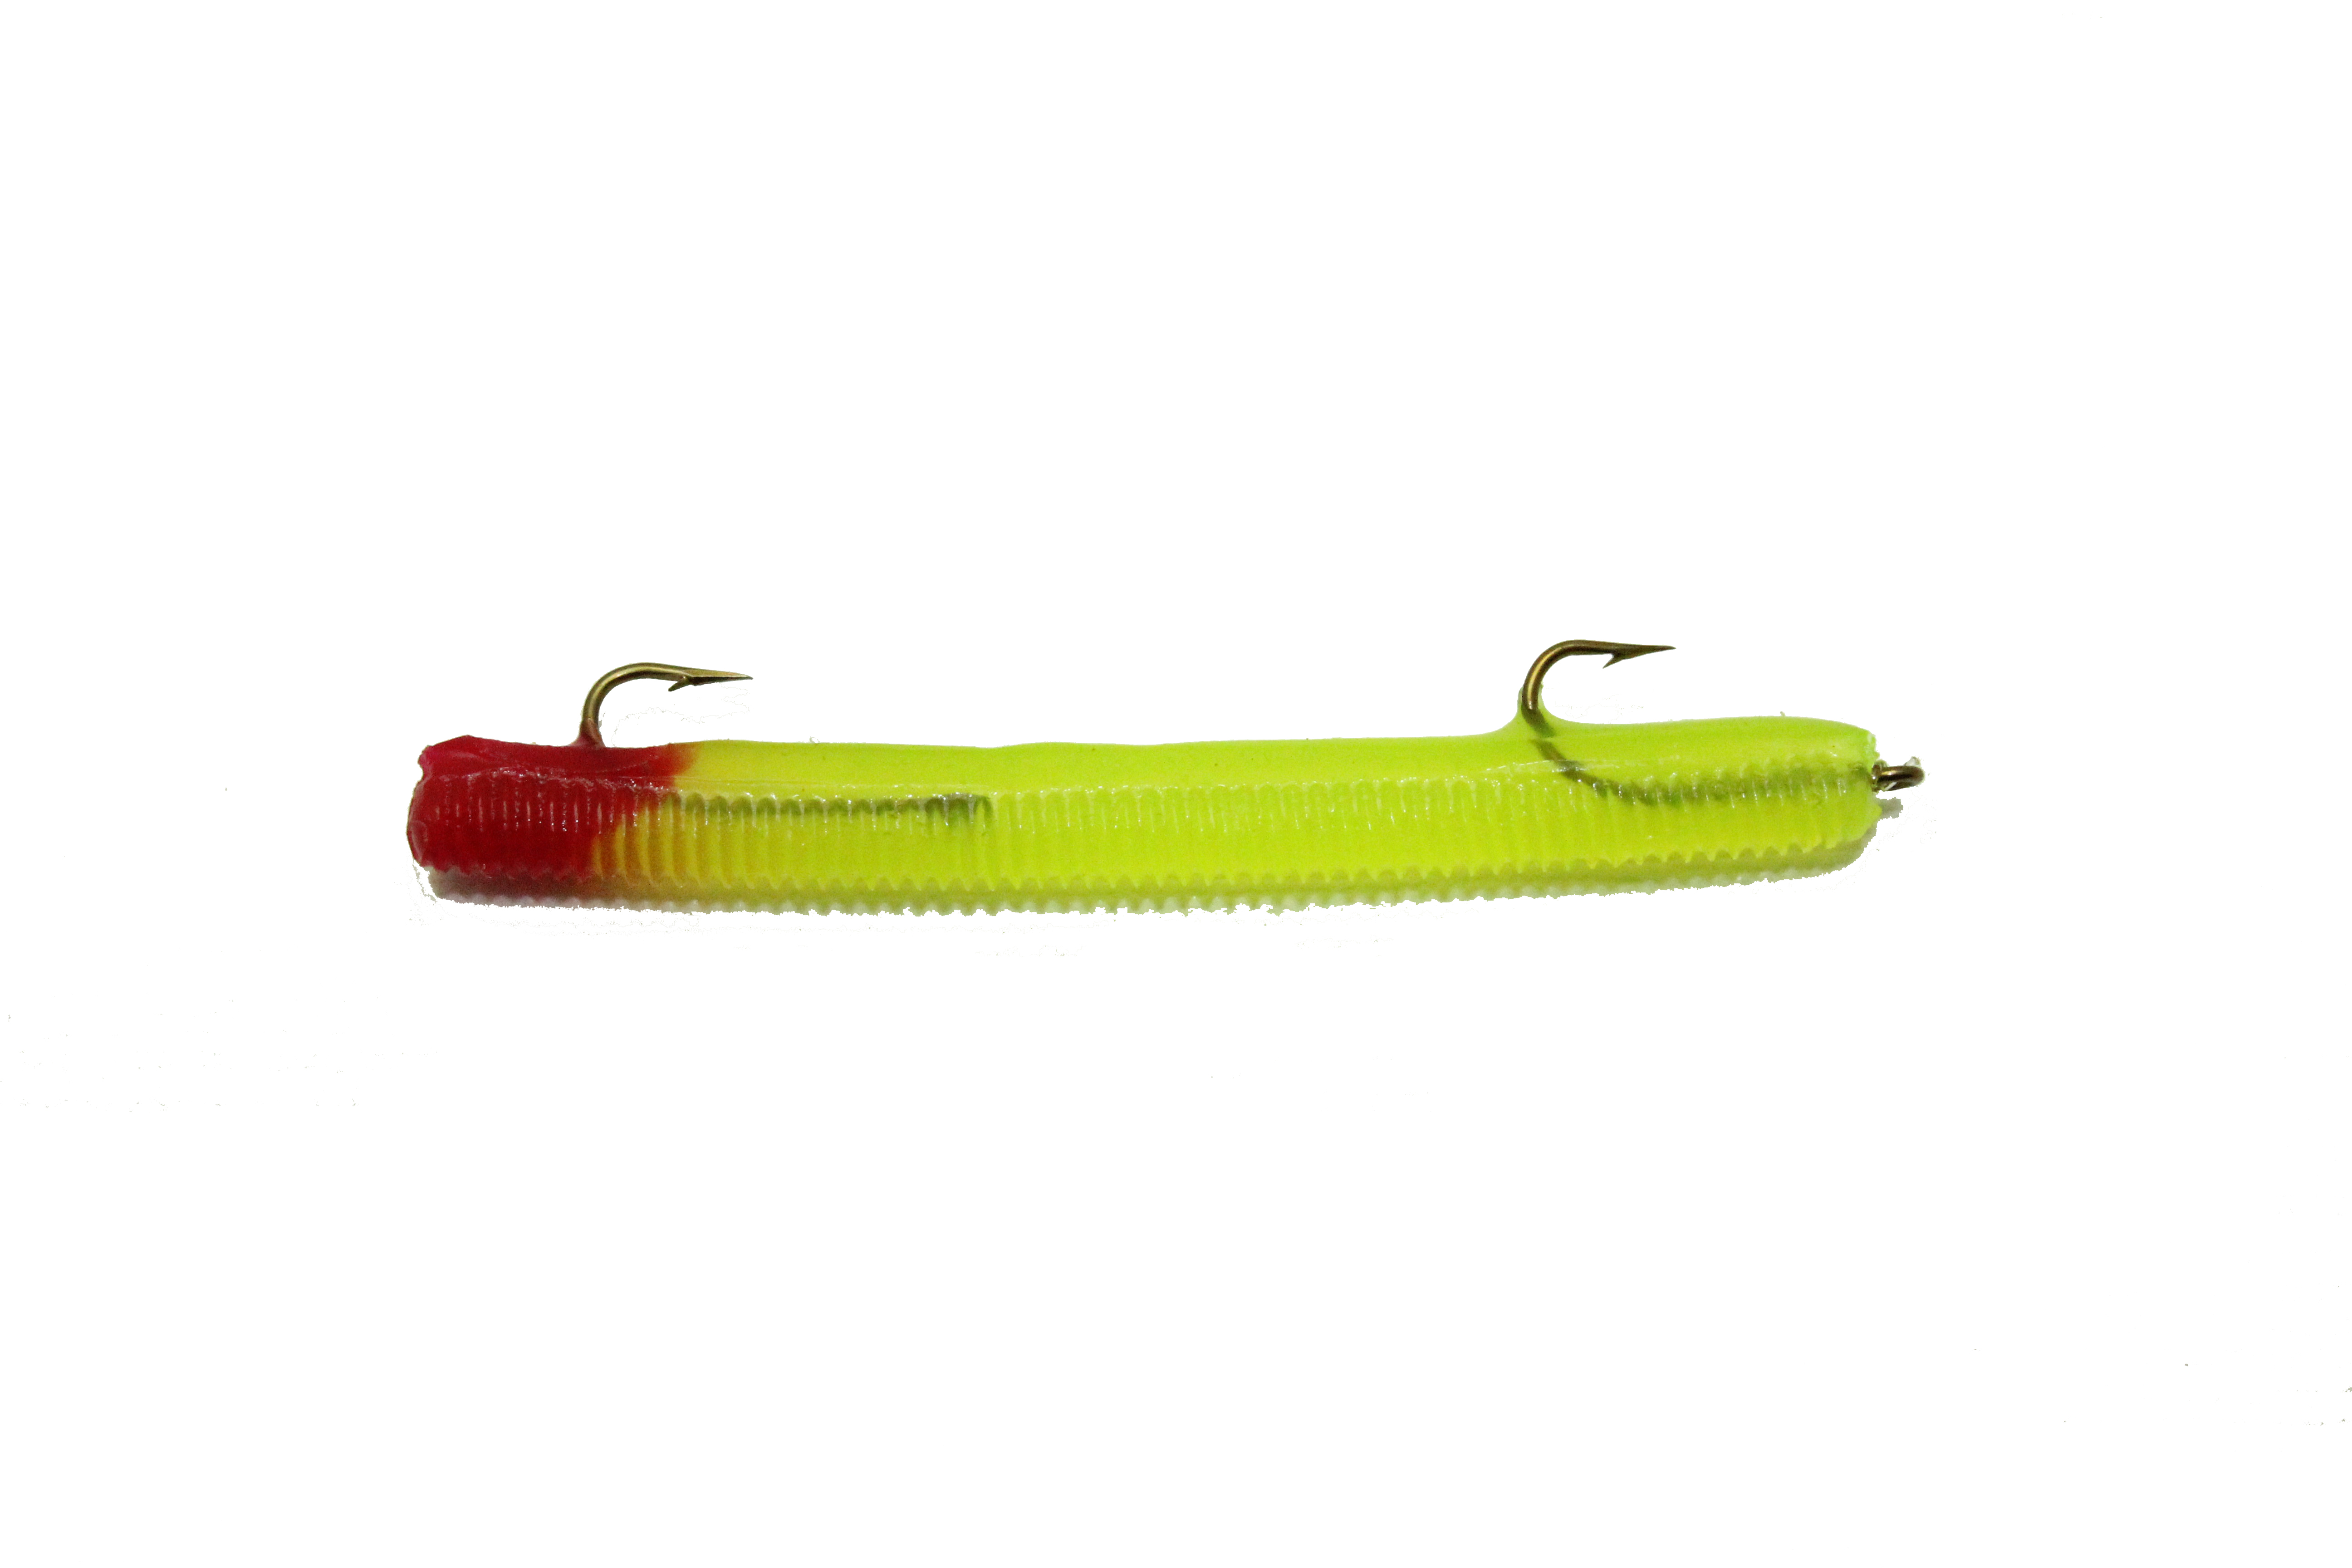 P-WEE WORM 2 1/2 - CHARTREUSE / RED TIP - IKE-CON Fishing Tackle